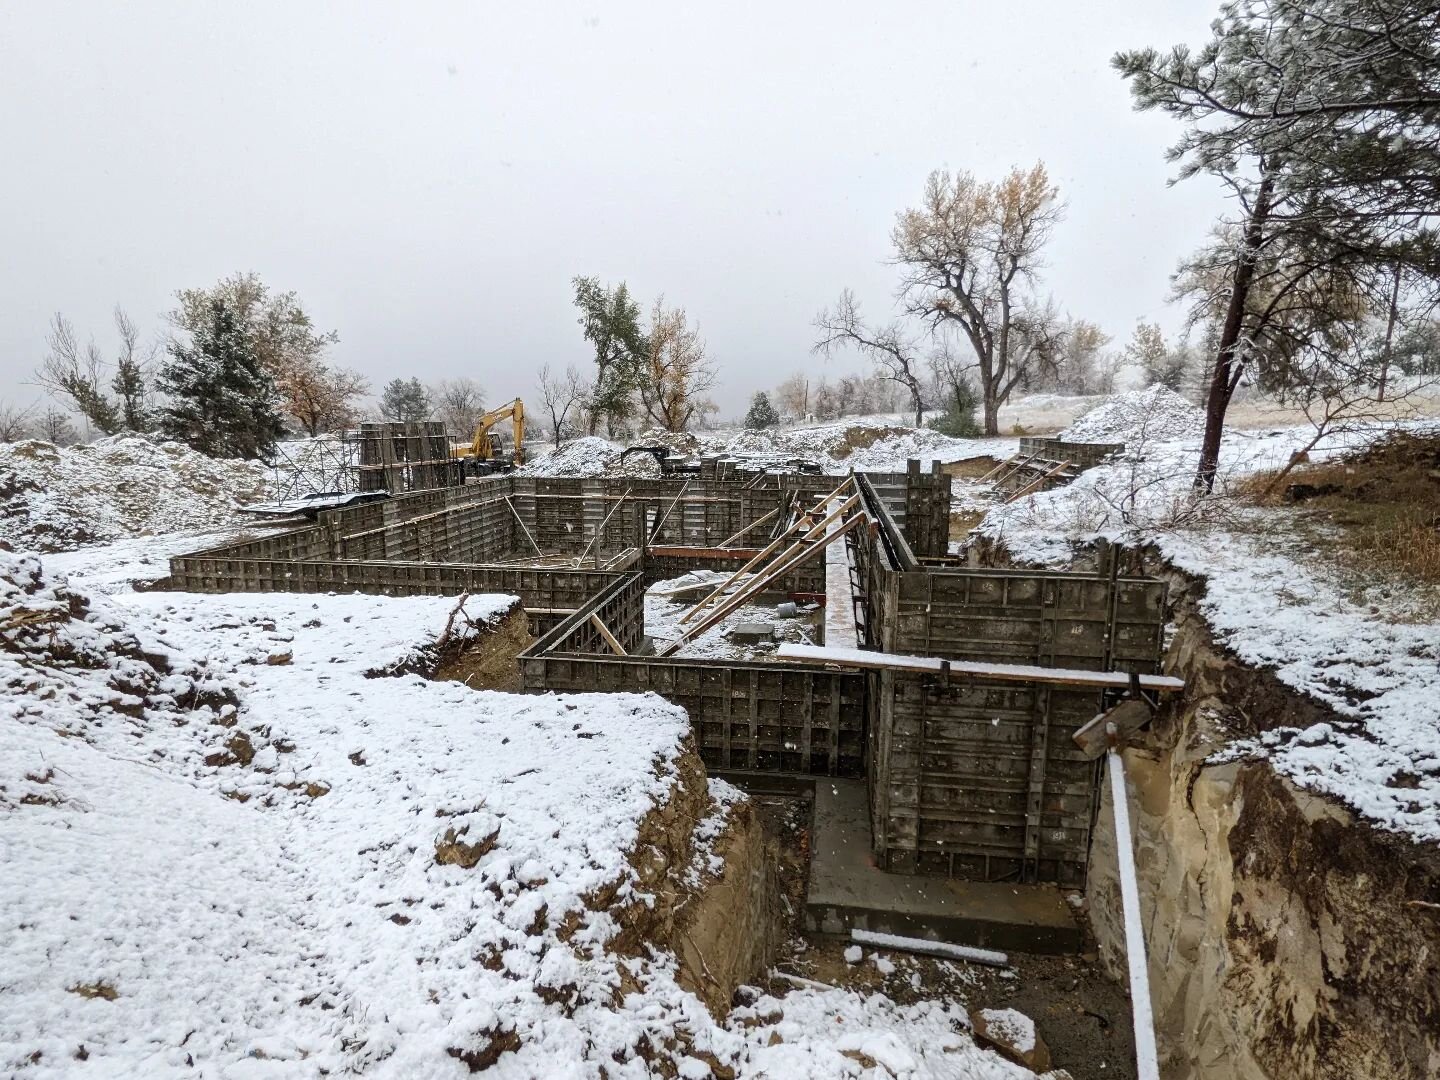 Plowing through the first snow of the year to keep this project moving! Classic Colorado fall weather to inspect footings while sweating and foundation walls while clearing snow off forms ❄️❄️❄️